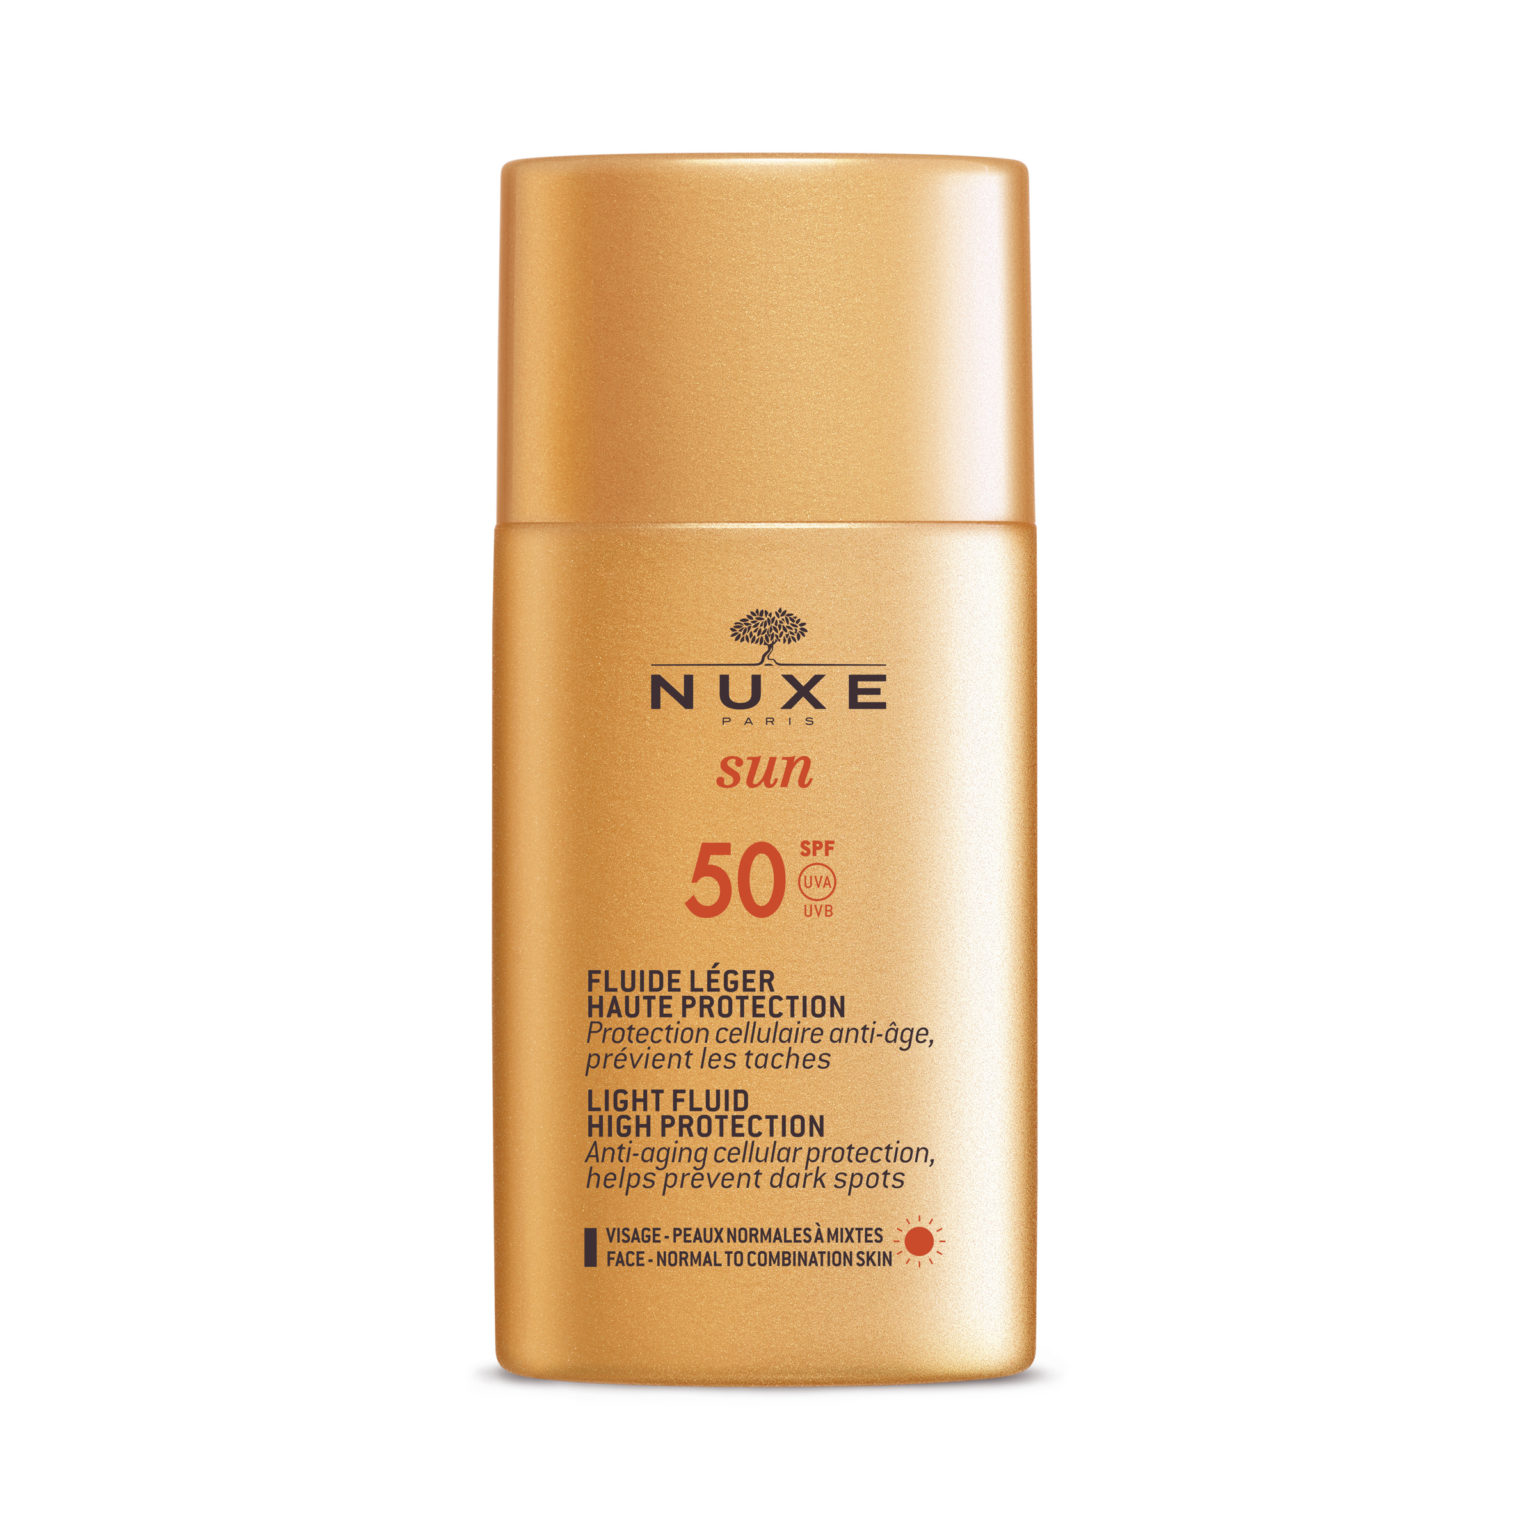 Nuxe Sunscreen Best Sun Protection Creams Fast Delivery